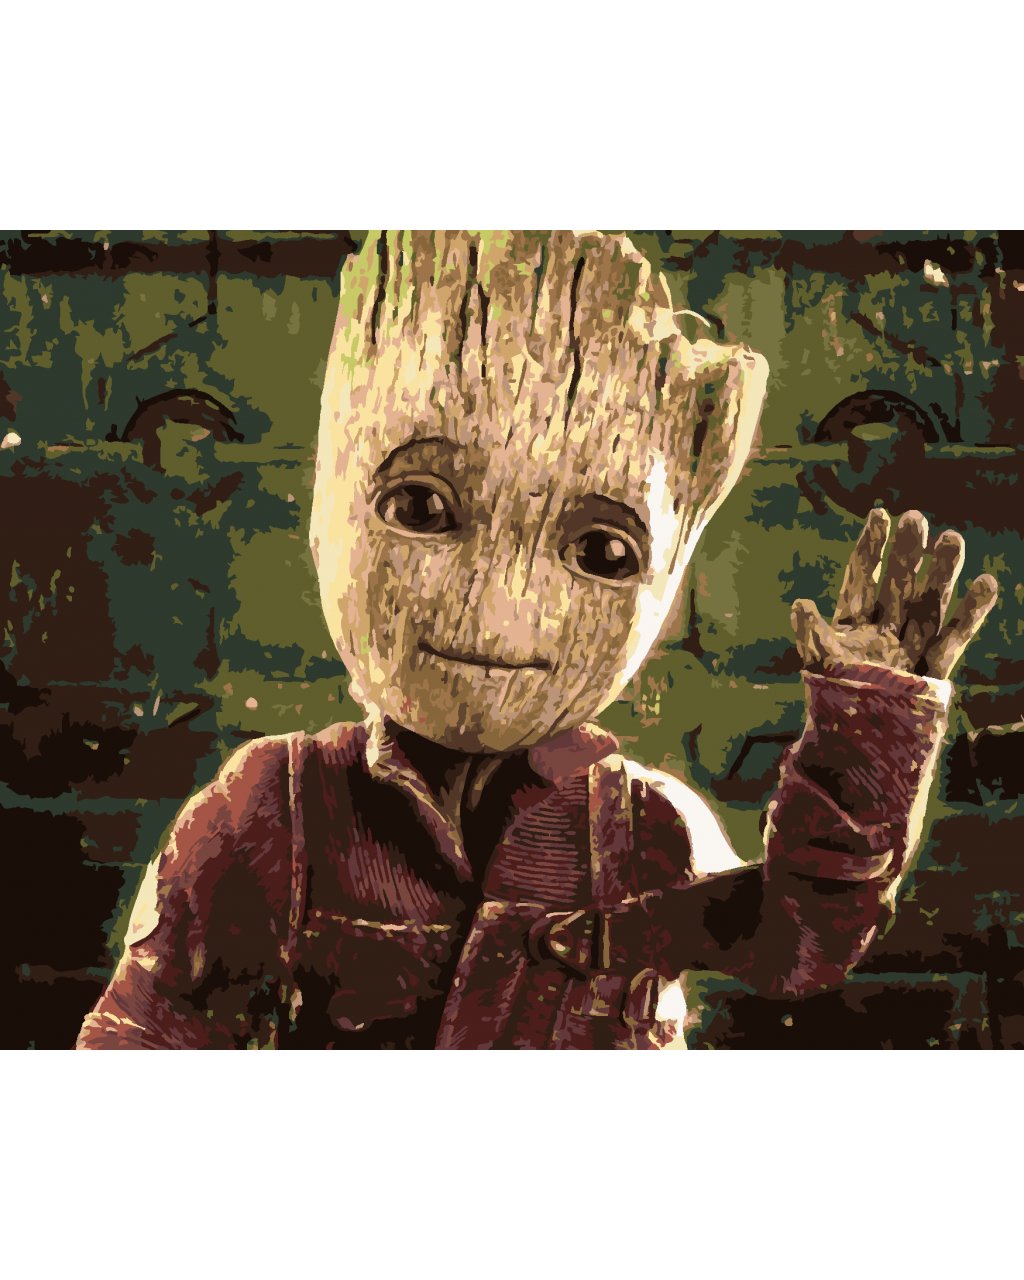 Poster Guardians of the Galaxy Your Groot 40x50cm